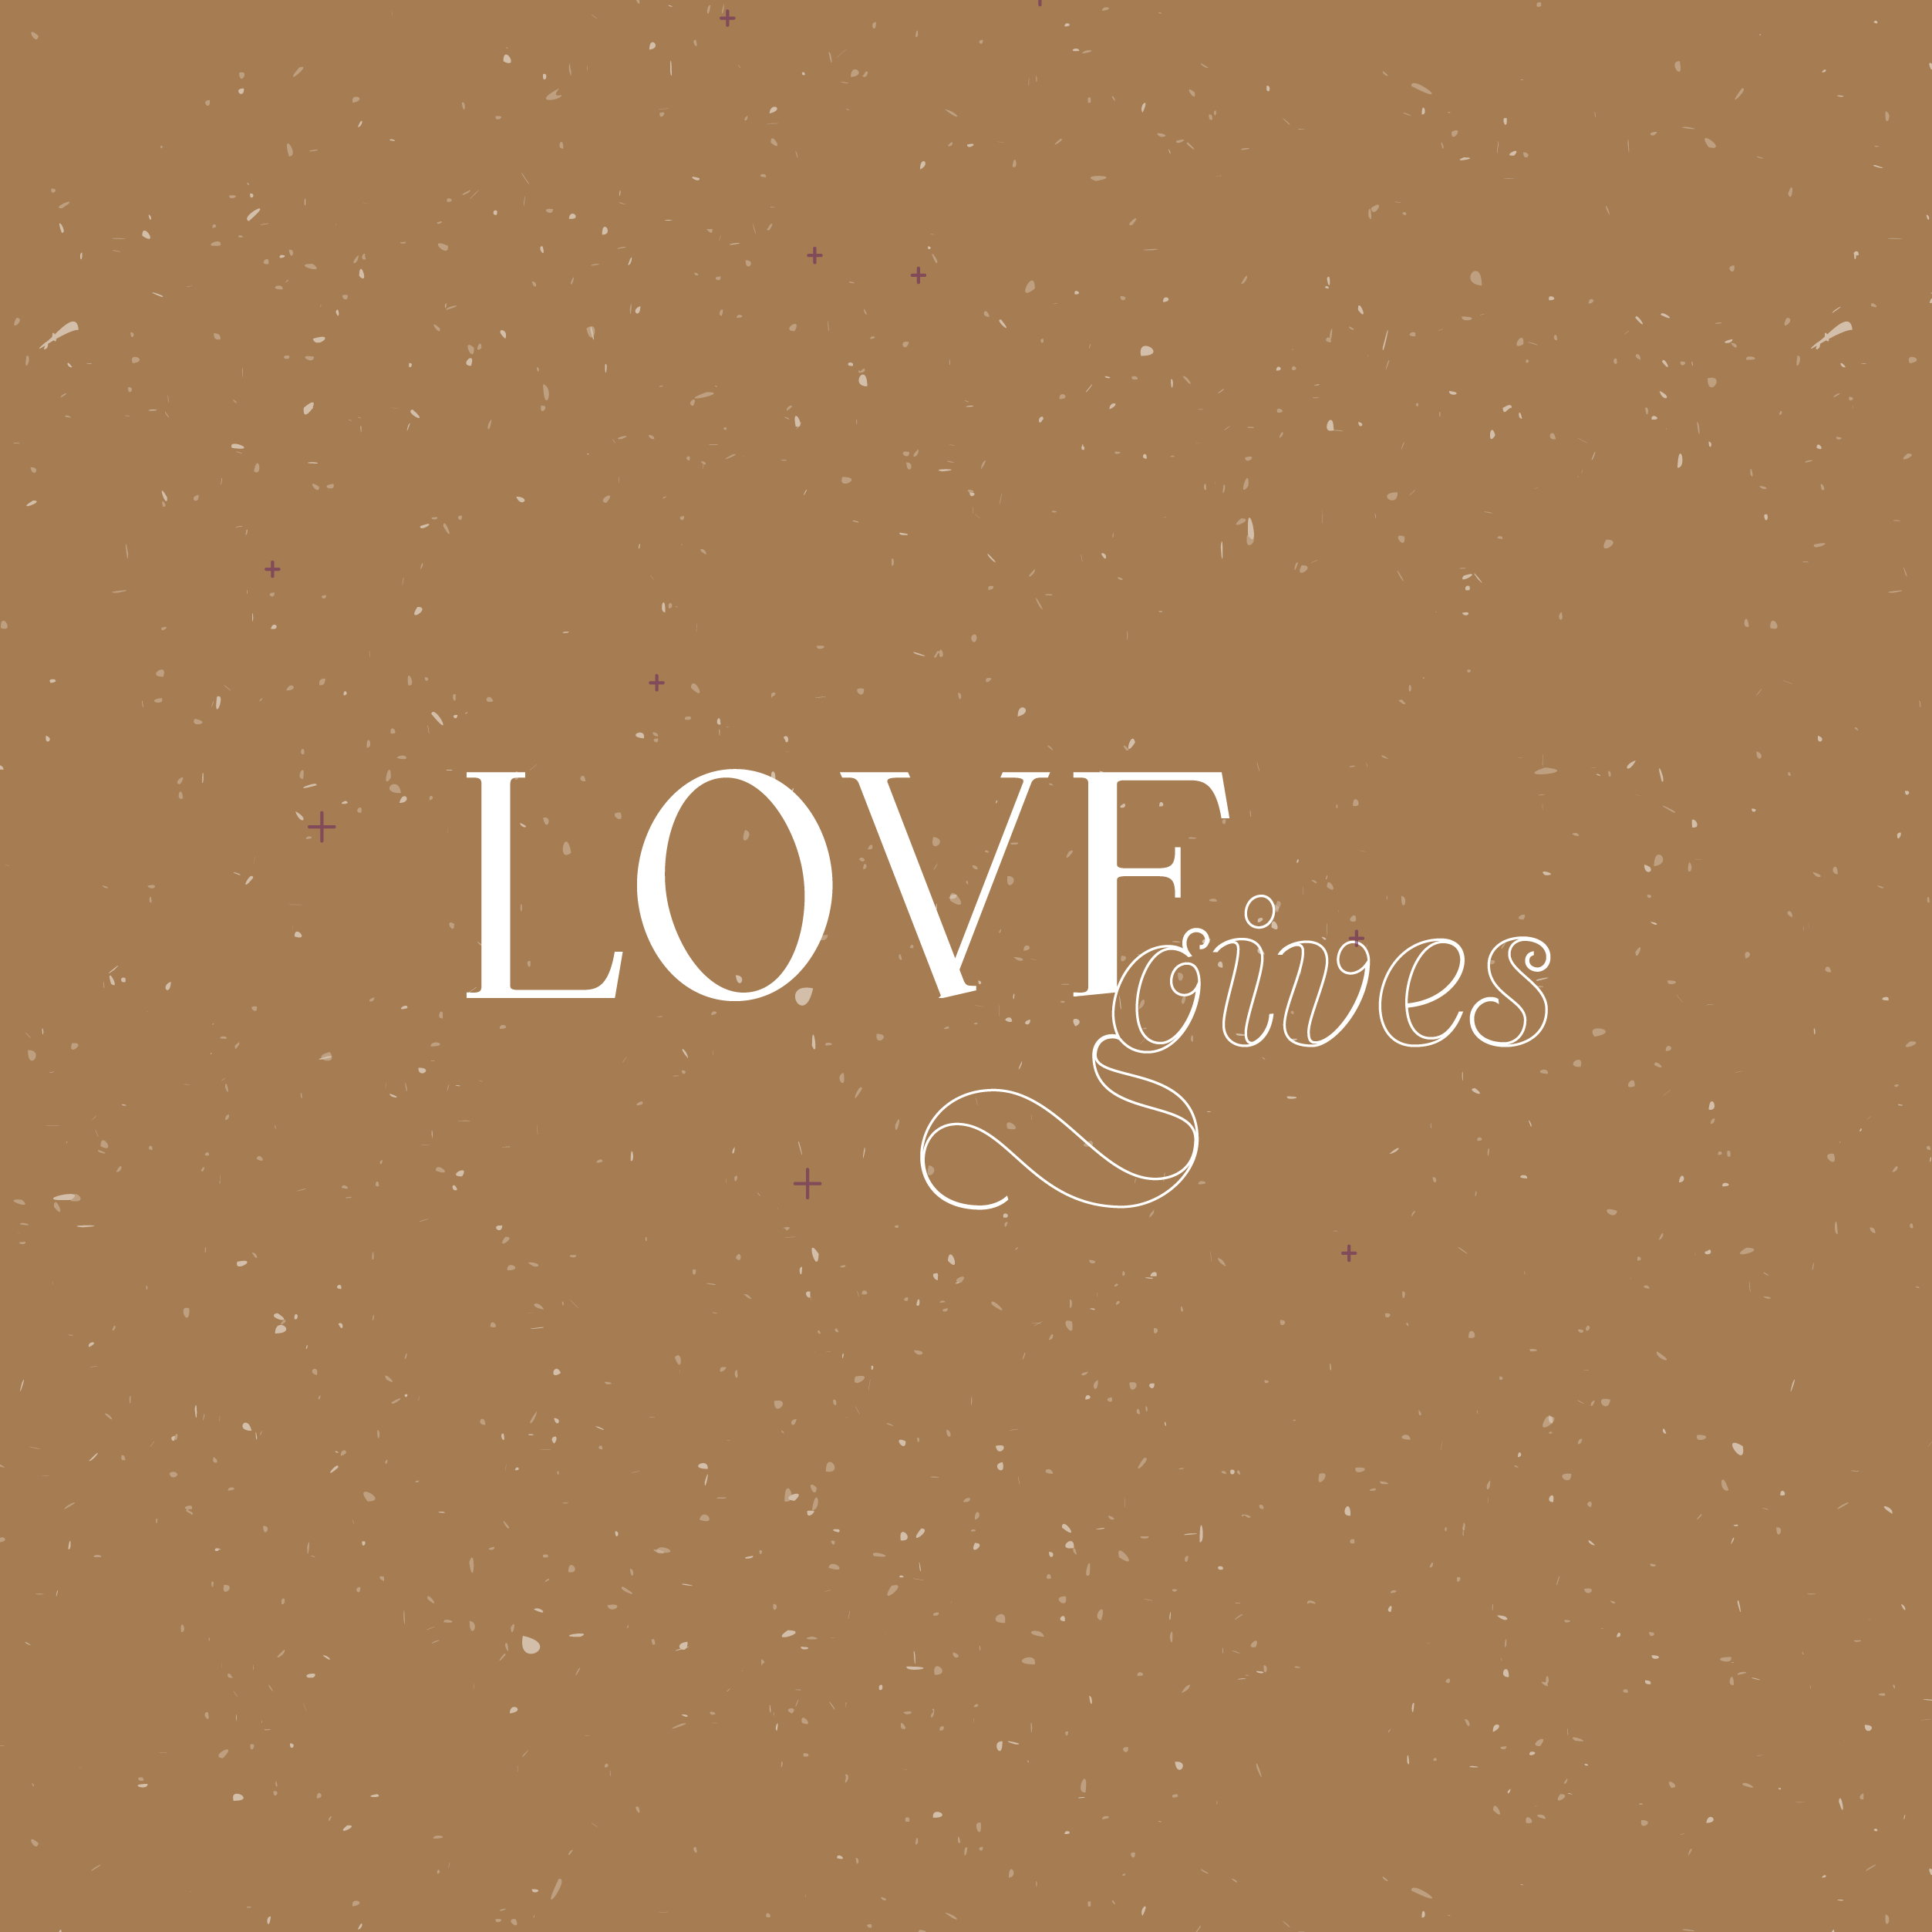 Love Gives: Prophets